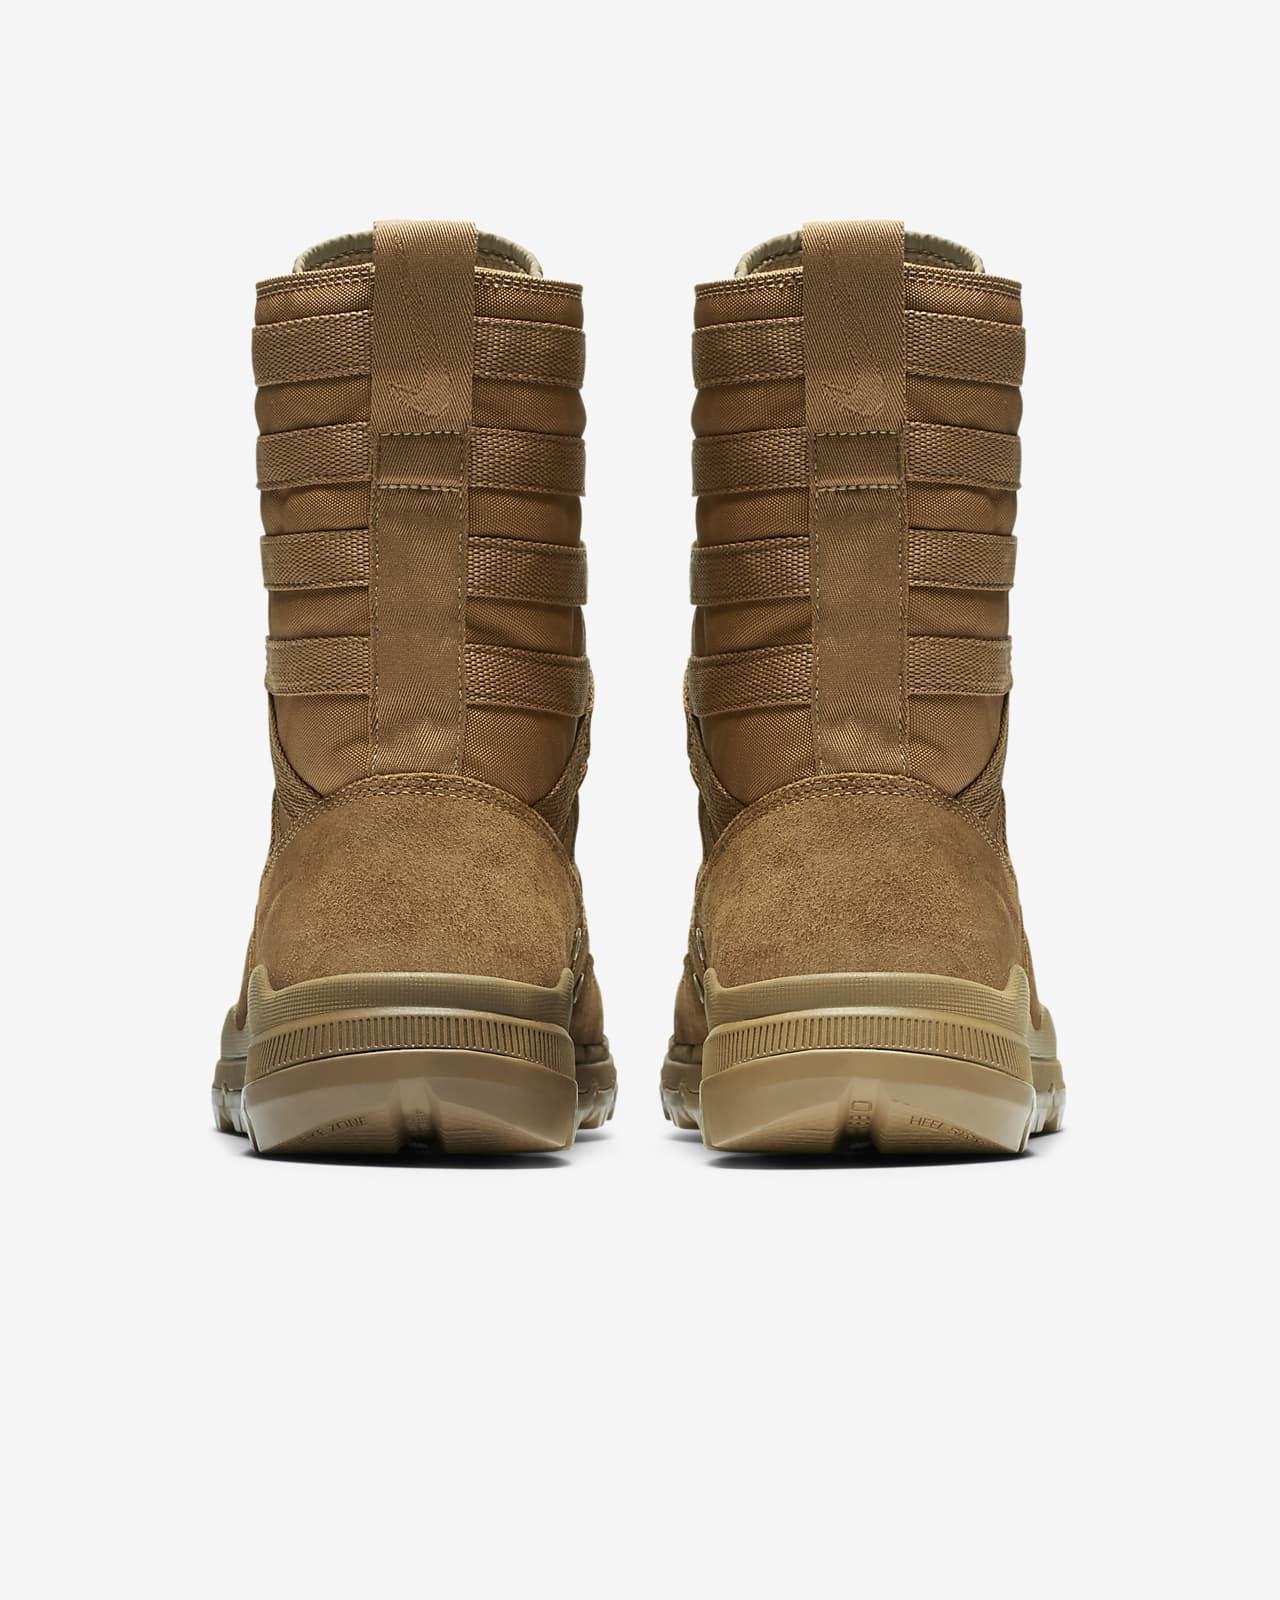 nike special field boot coyote